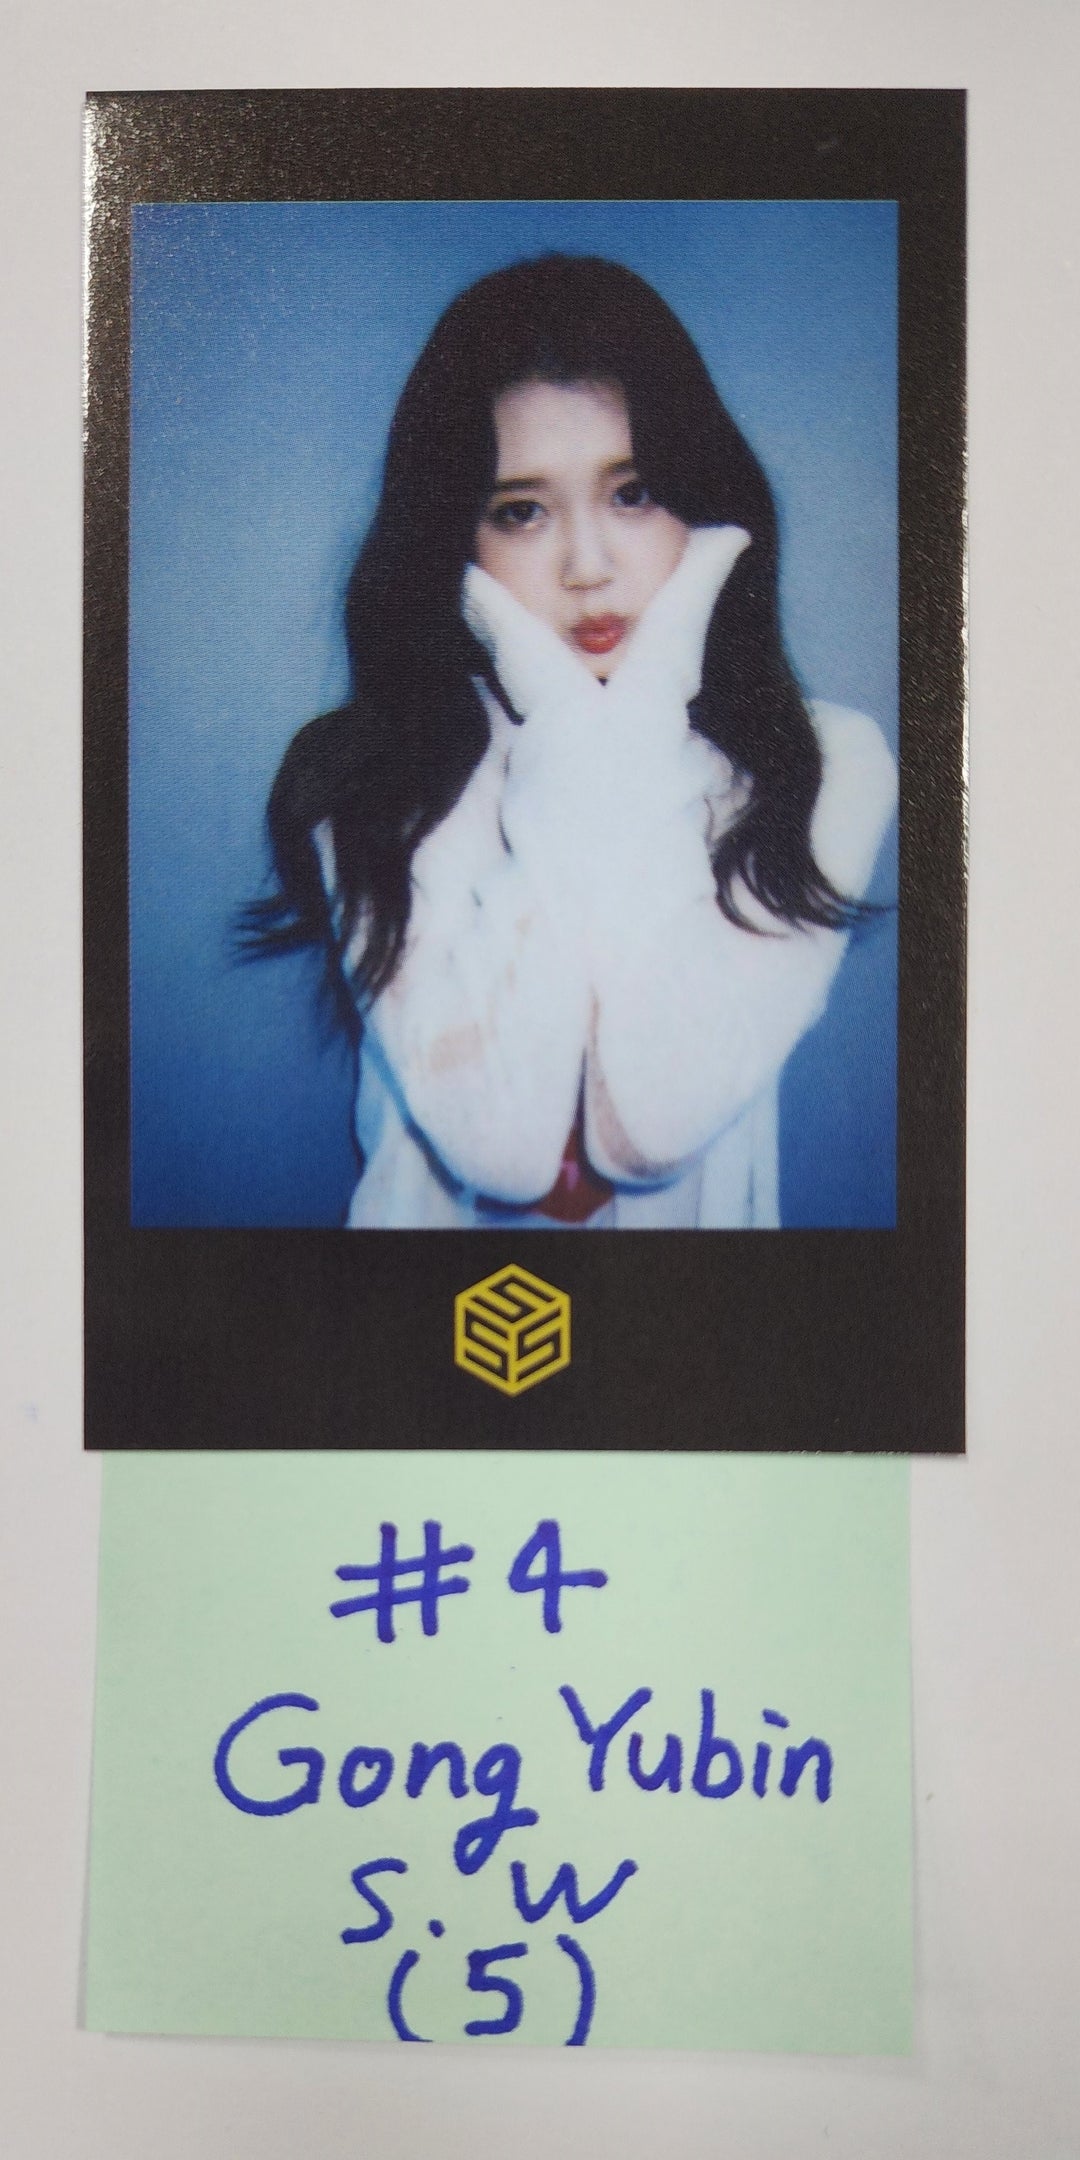 TripleS "Acid Angel from Asia" - Soundwave Fansign Event Polaroid Type Photocard